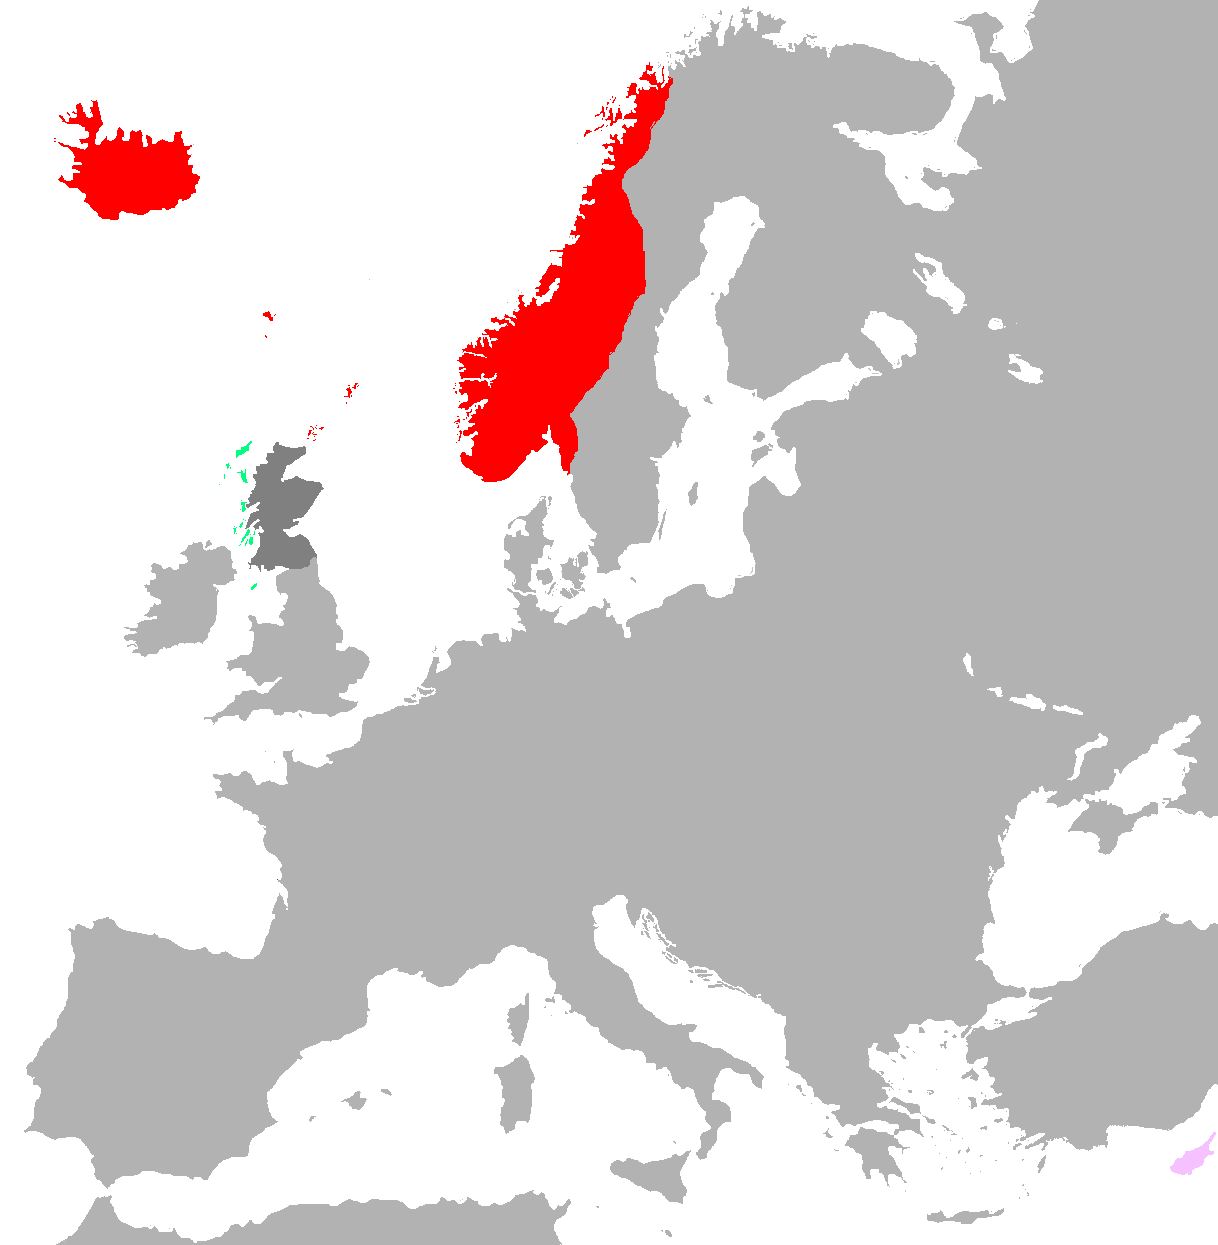 File:Kingdom of Norway.png.